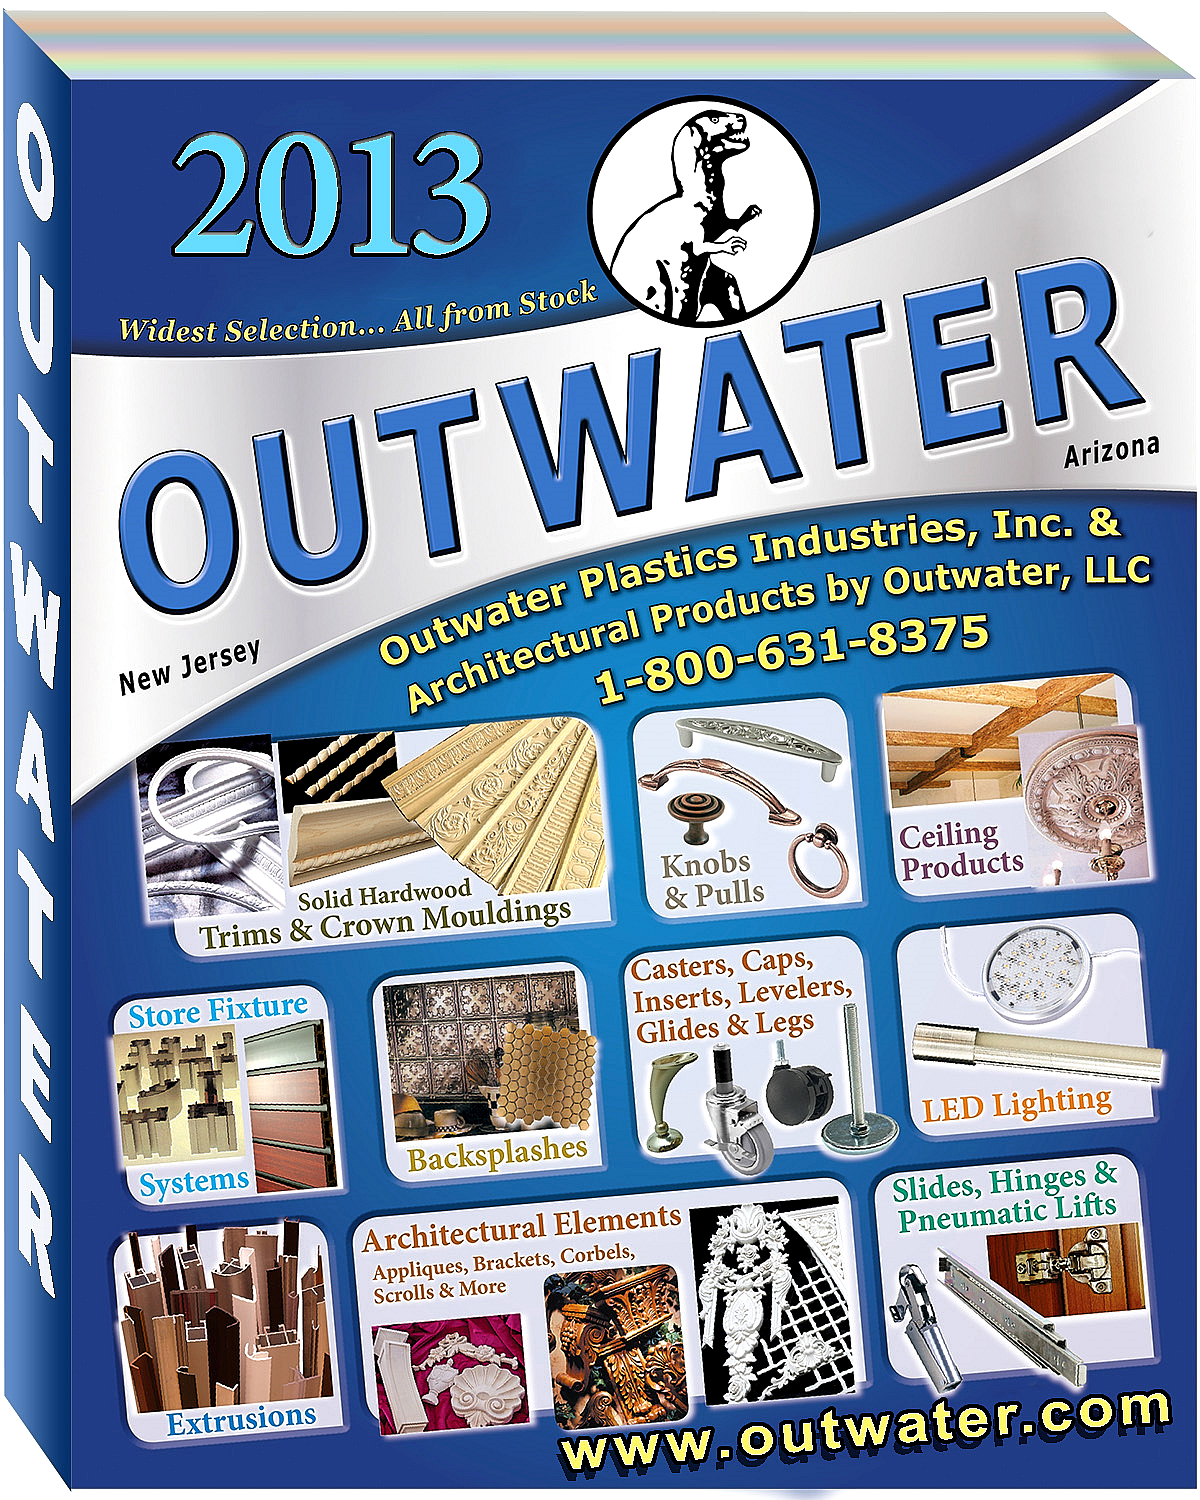 Outwater offers more than 65,000 standard and innovative products